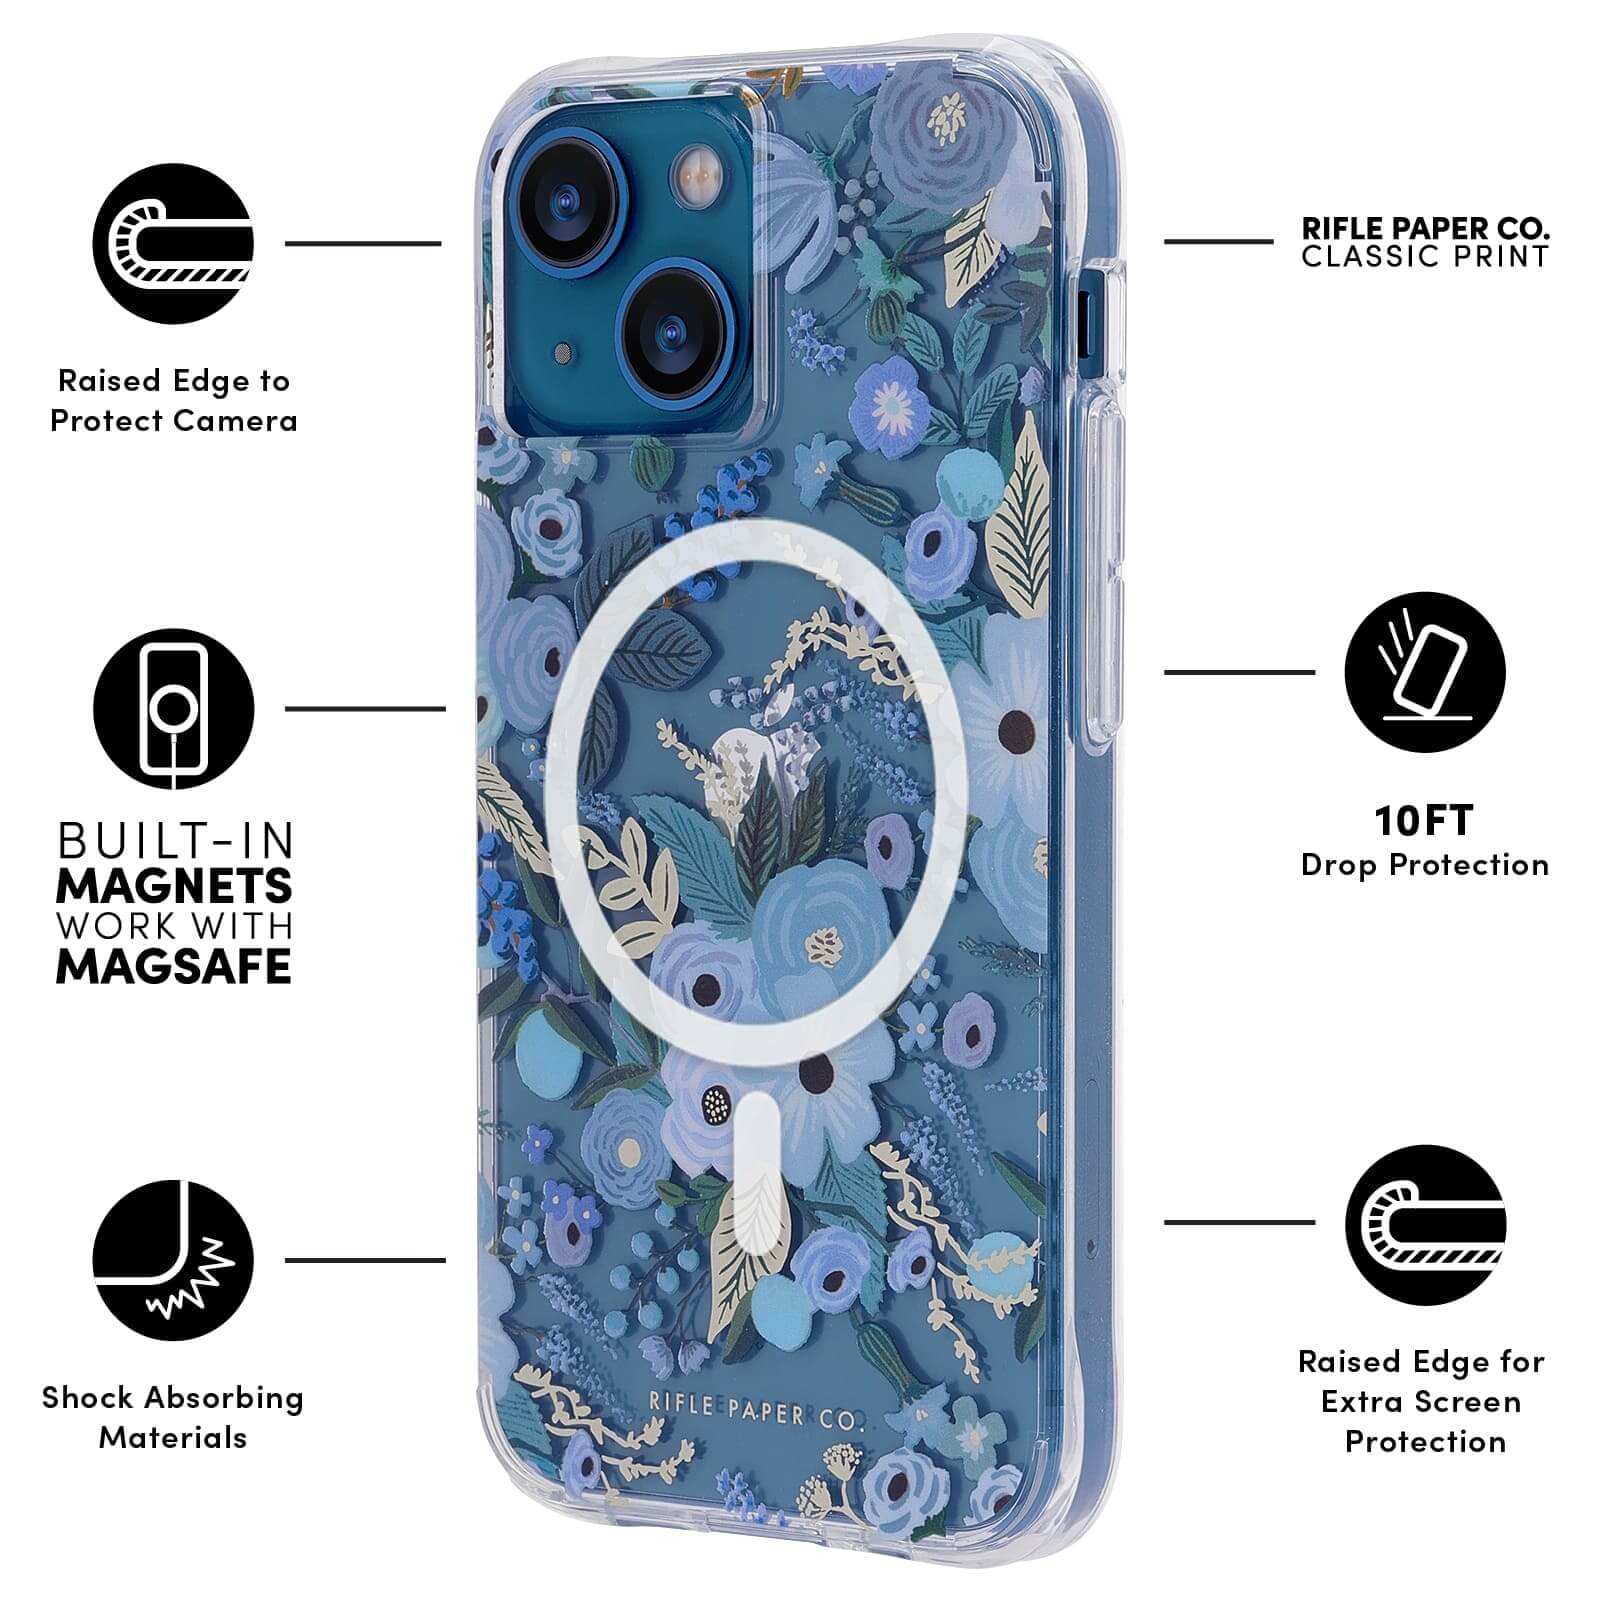 FEATURES: RAISED EDGE TO PROTECT CAMERA, BUILT-IN MAGNETS WORK WITH MAGSAFE, SHOCK ABSORBING MATERIALS, RIFLE PAPER CO. CLASSIC PRINT, 10FT DROP PROTECTION, RAISED EDGE FOR SCREEN PROTECTION. COLOR::GARDEN PARTY BLUE